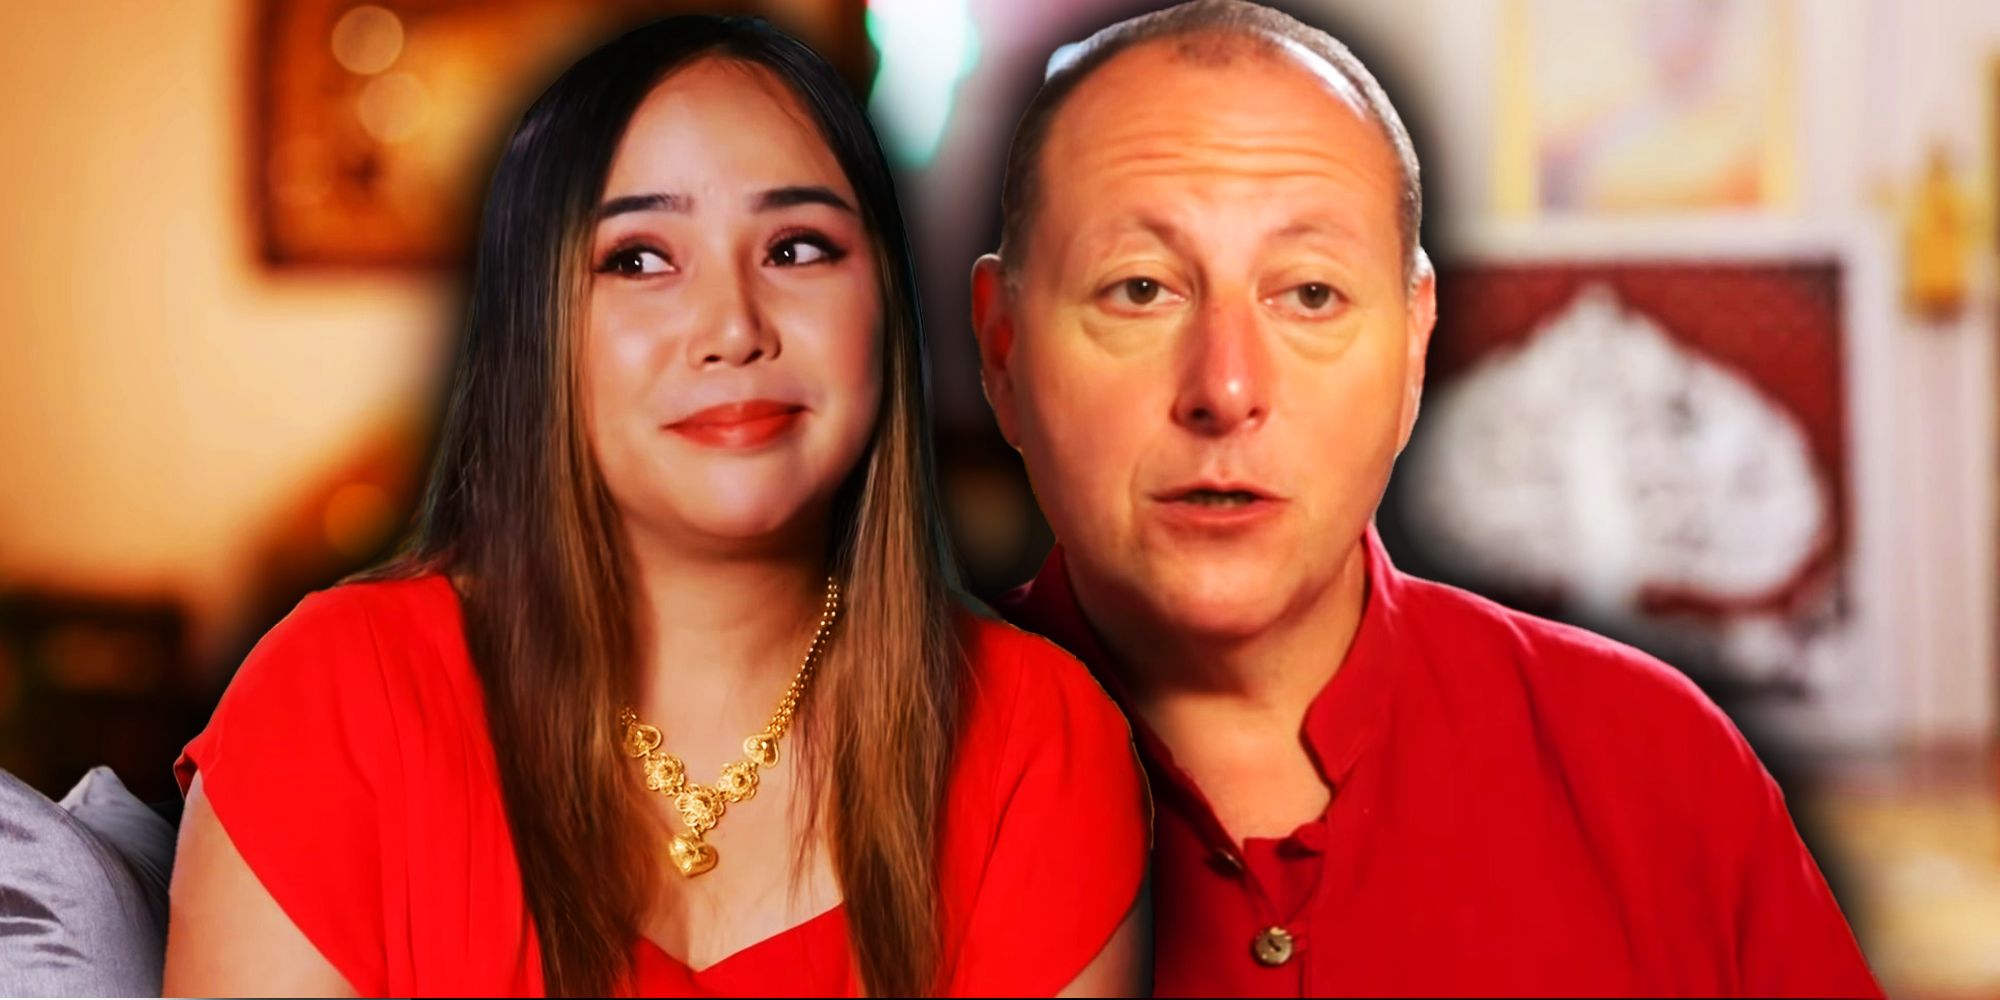 David and Annie from 90 Day Fiance